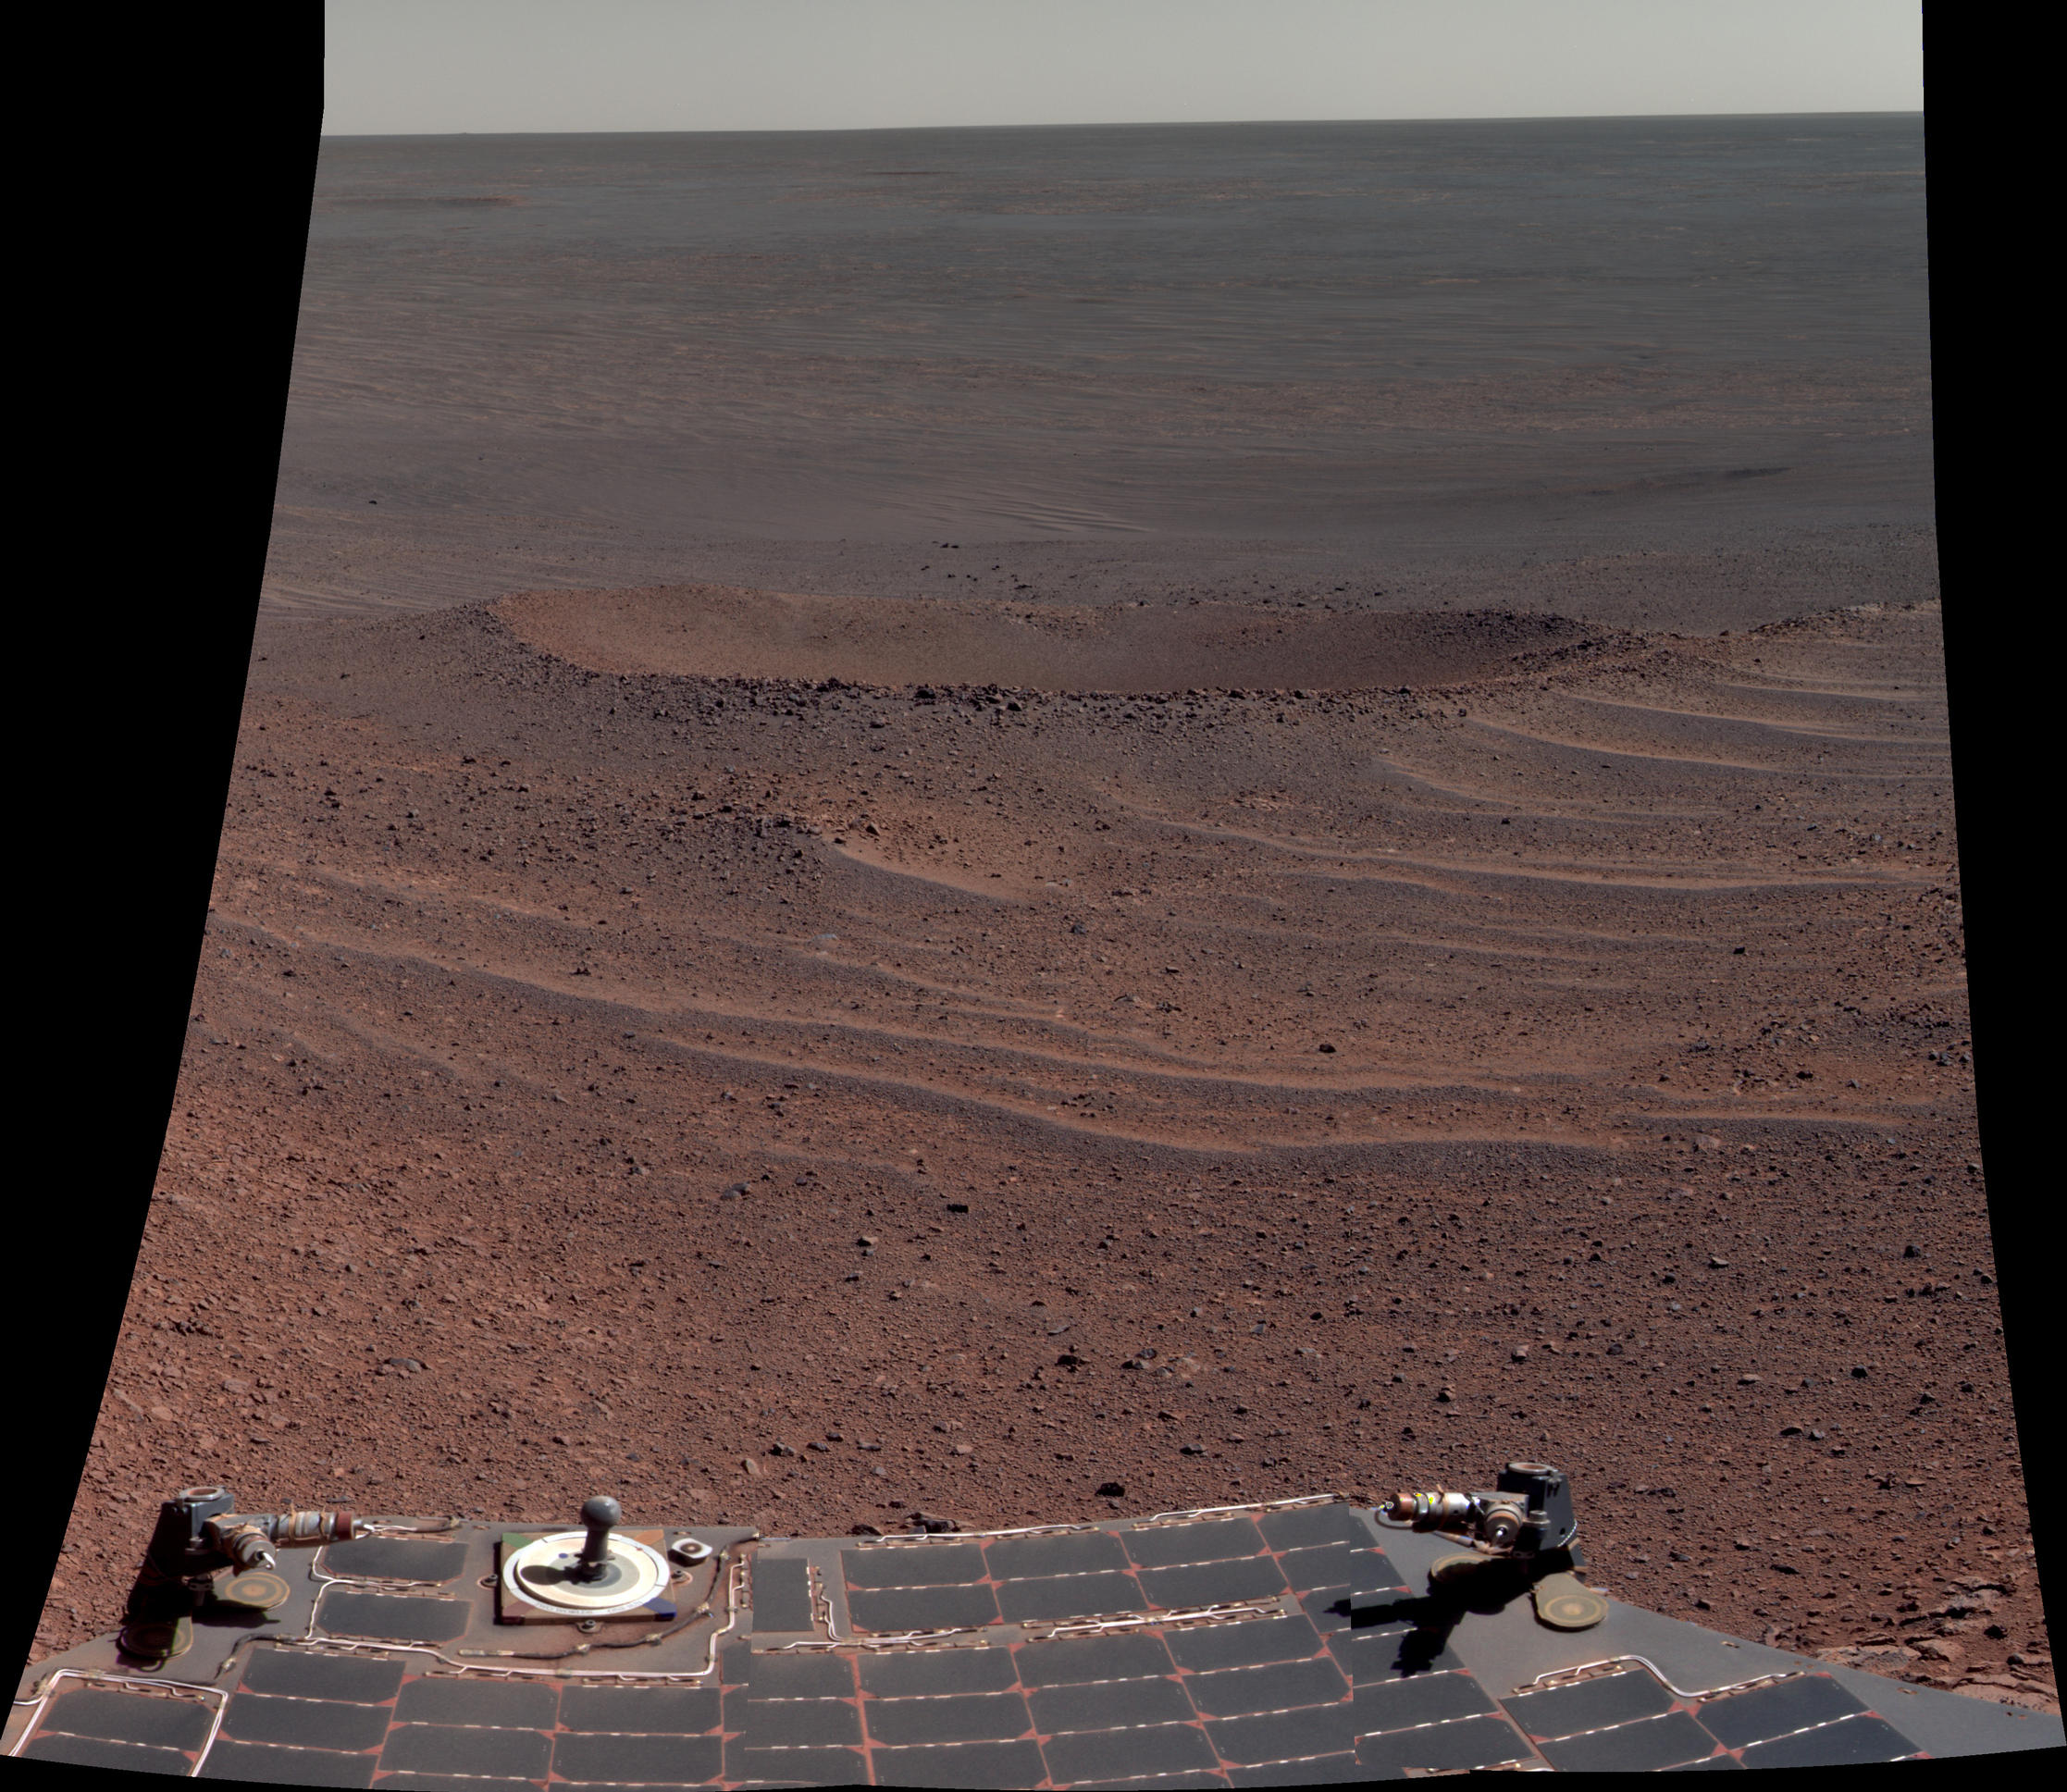 This false-color view from NASA's Mars Exploration Rover Opportunity shows "Lunokhod 2 Crater," which lies south of Solander Point on the west rim of Endeavour Crater.